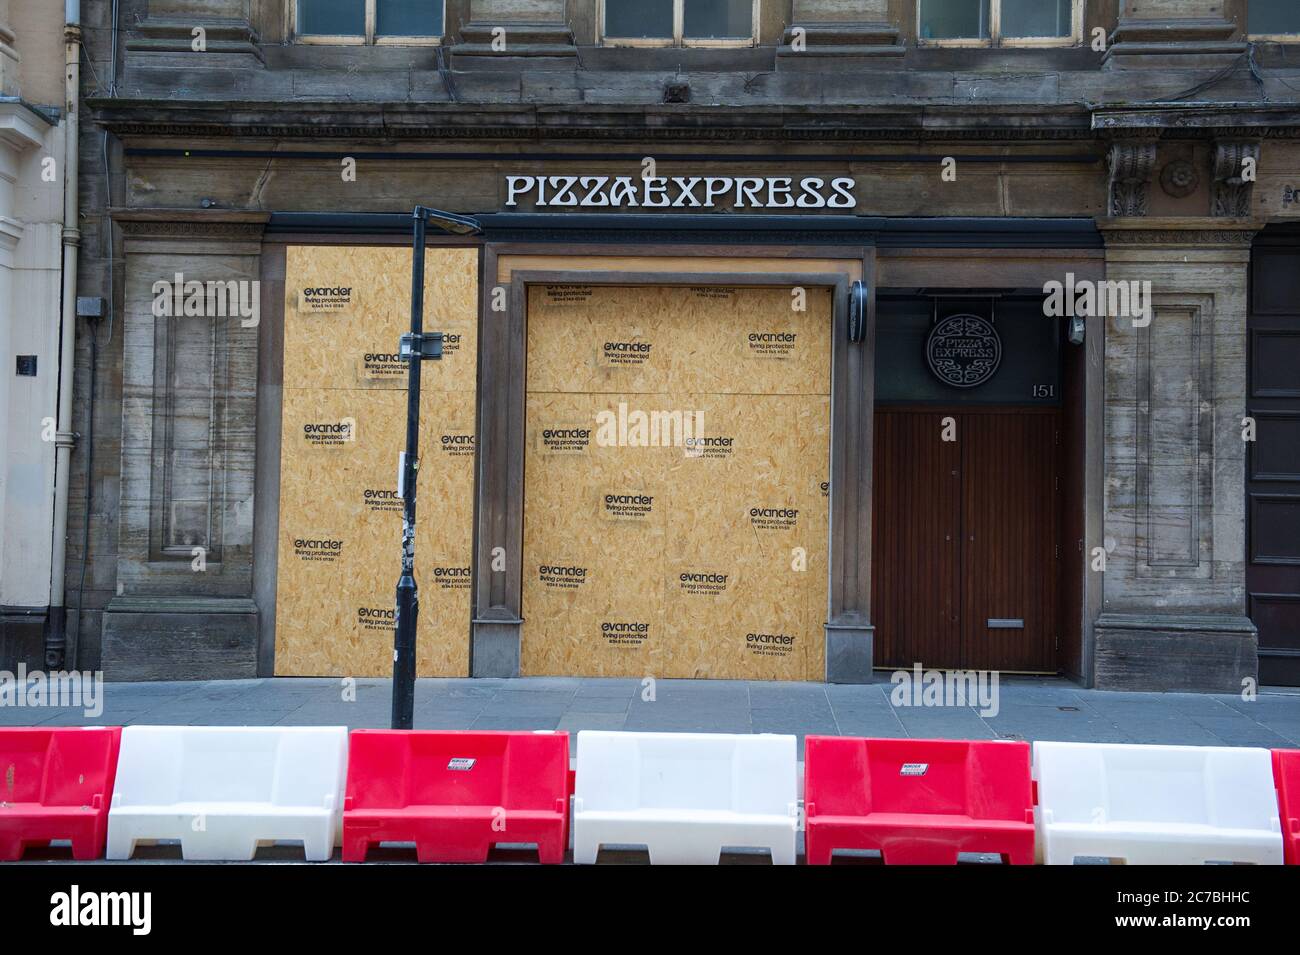 Glasgow, Scotland, UK. 16th July, 2020. Pictured: Bars and restaurants sit empty and boarded up still after the Coronavirus (COVID19) crisis eases. It has forced business to close permanently, whilst others have had to lay off staff. The UK government will finish the Furlough scheme however due to the lack of footfall in the city, these premises will most likely stay closed and boarded up. Credit: Colin Fisher/Alamy Live News Stock Photo